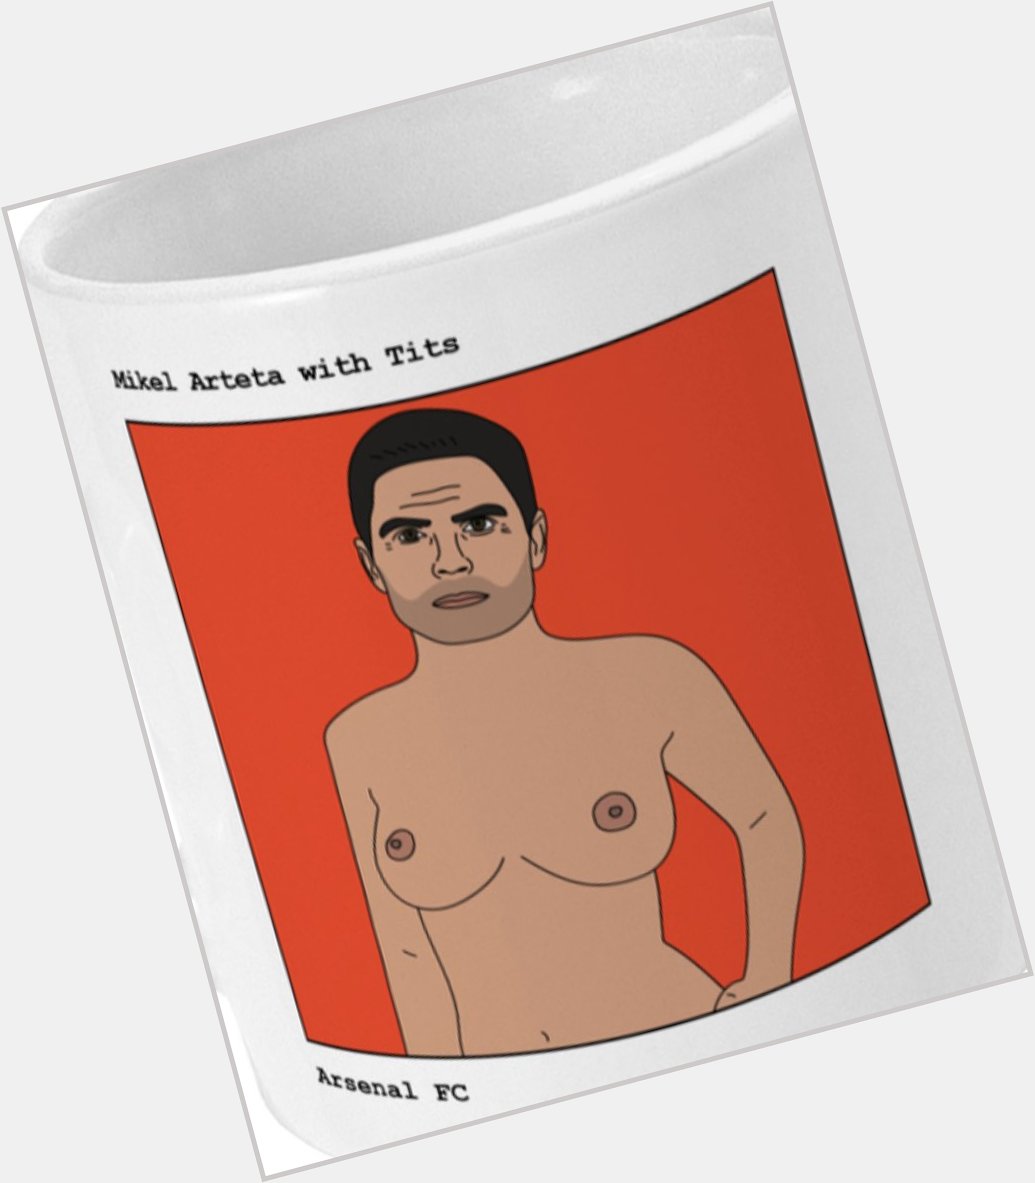 Happy birthday Couldn t get you the mug so here s Mikel Arteta with tits 